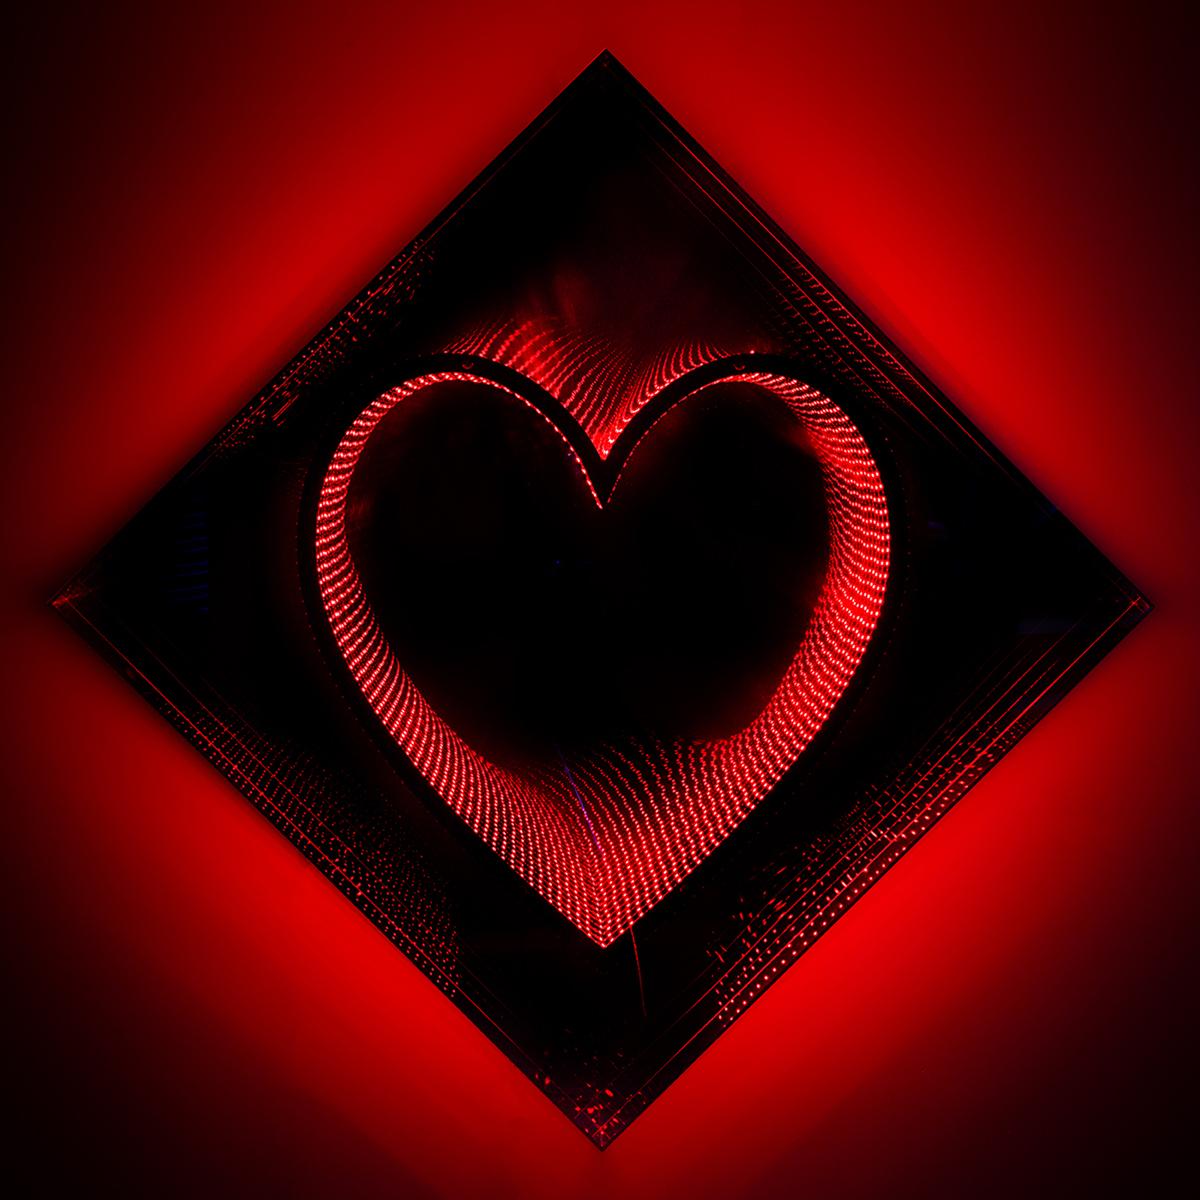 Hand-Crafted Heart Light Mirror Wall Decoration For Sale